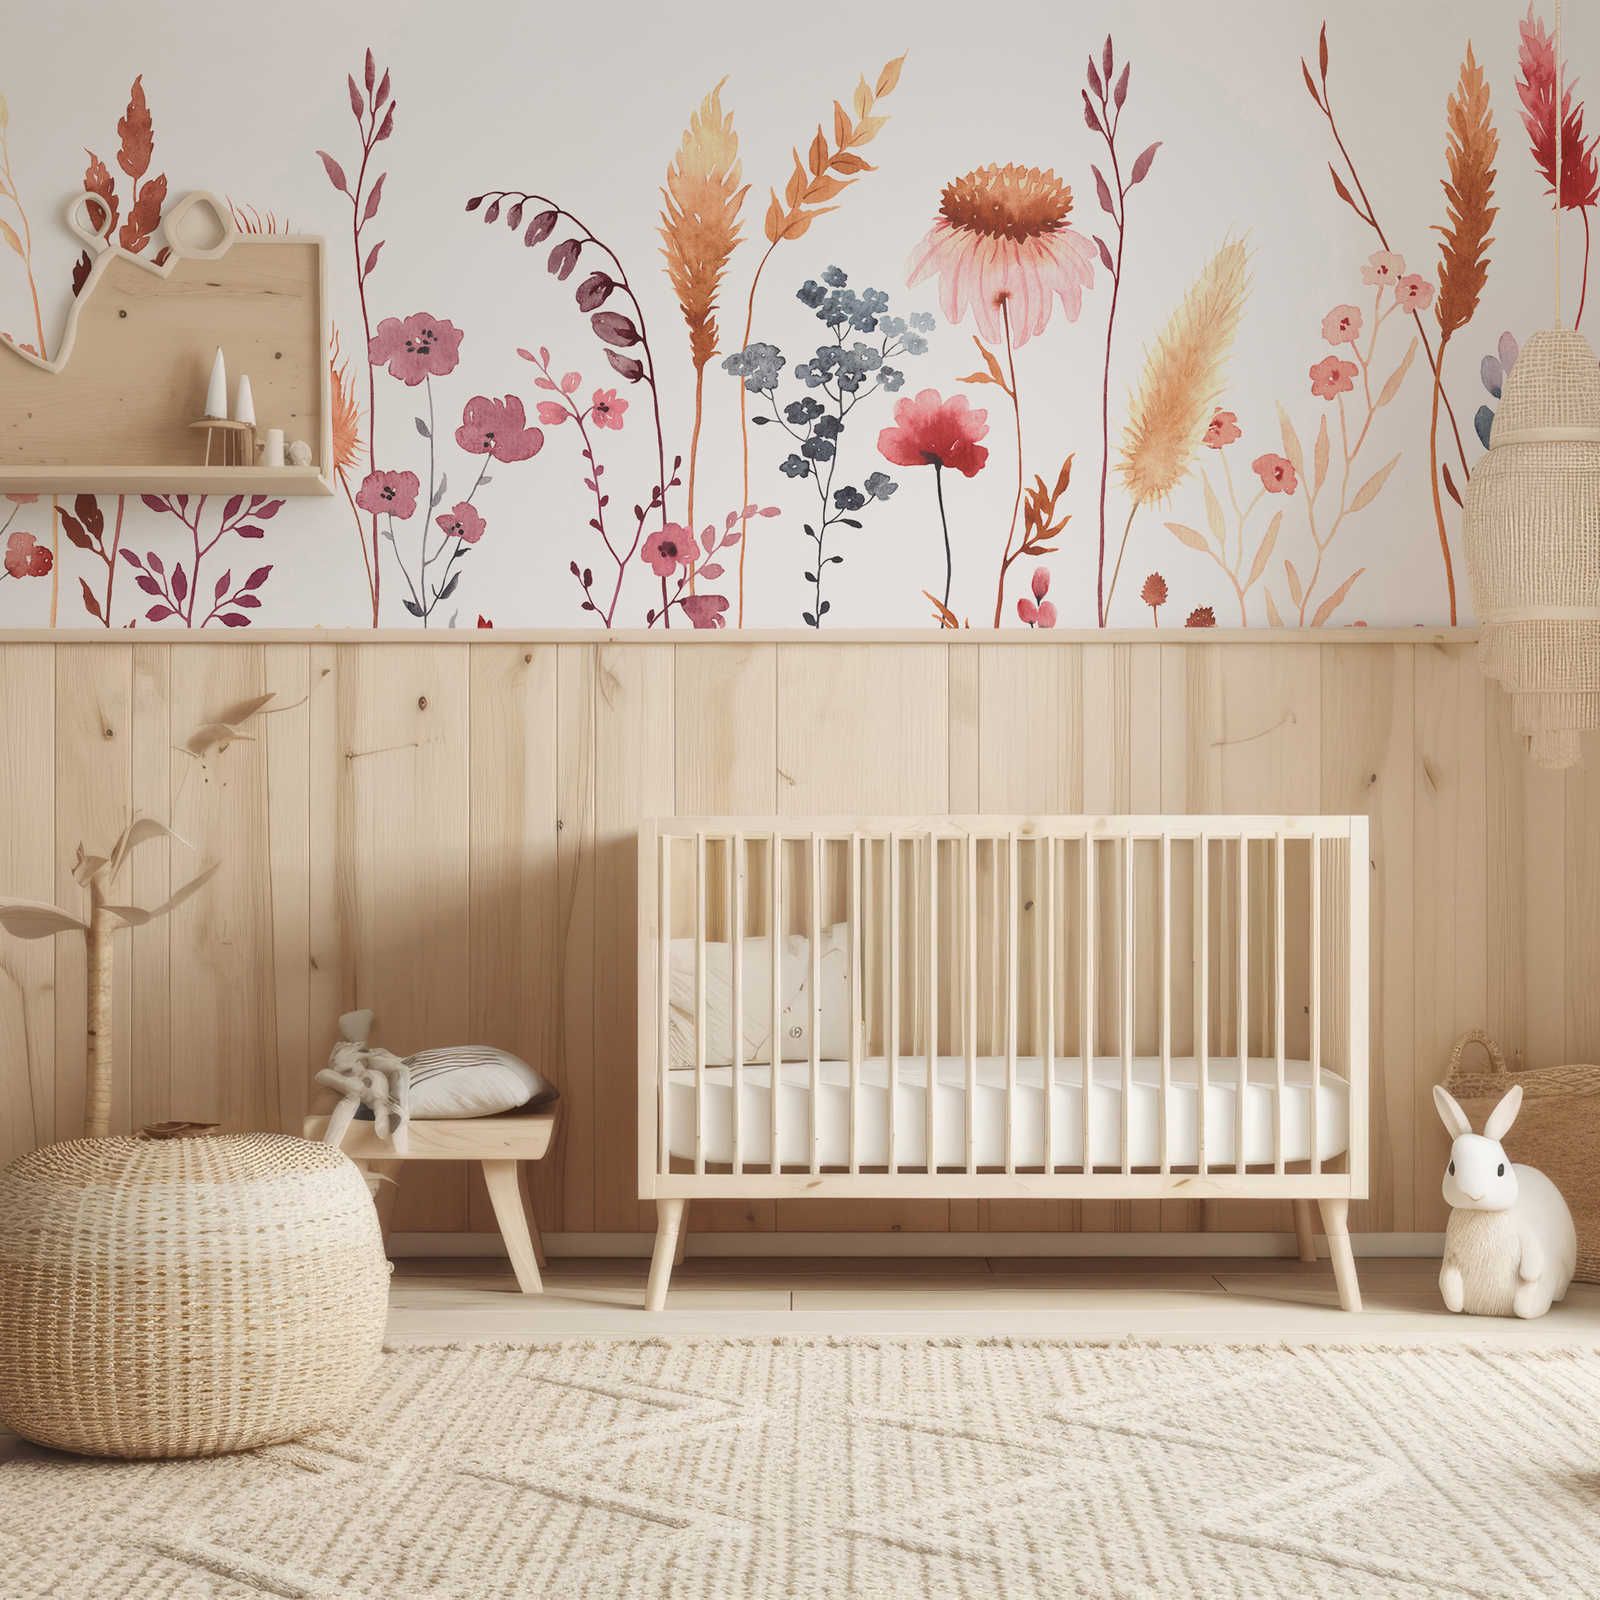         Photo wallpaper for children's room with leaves and grasses - Smooth & slightly shiny non-woven
    